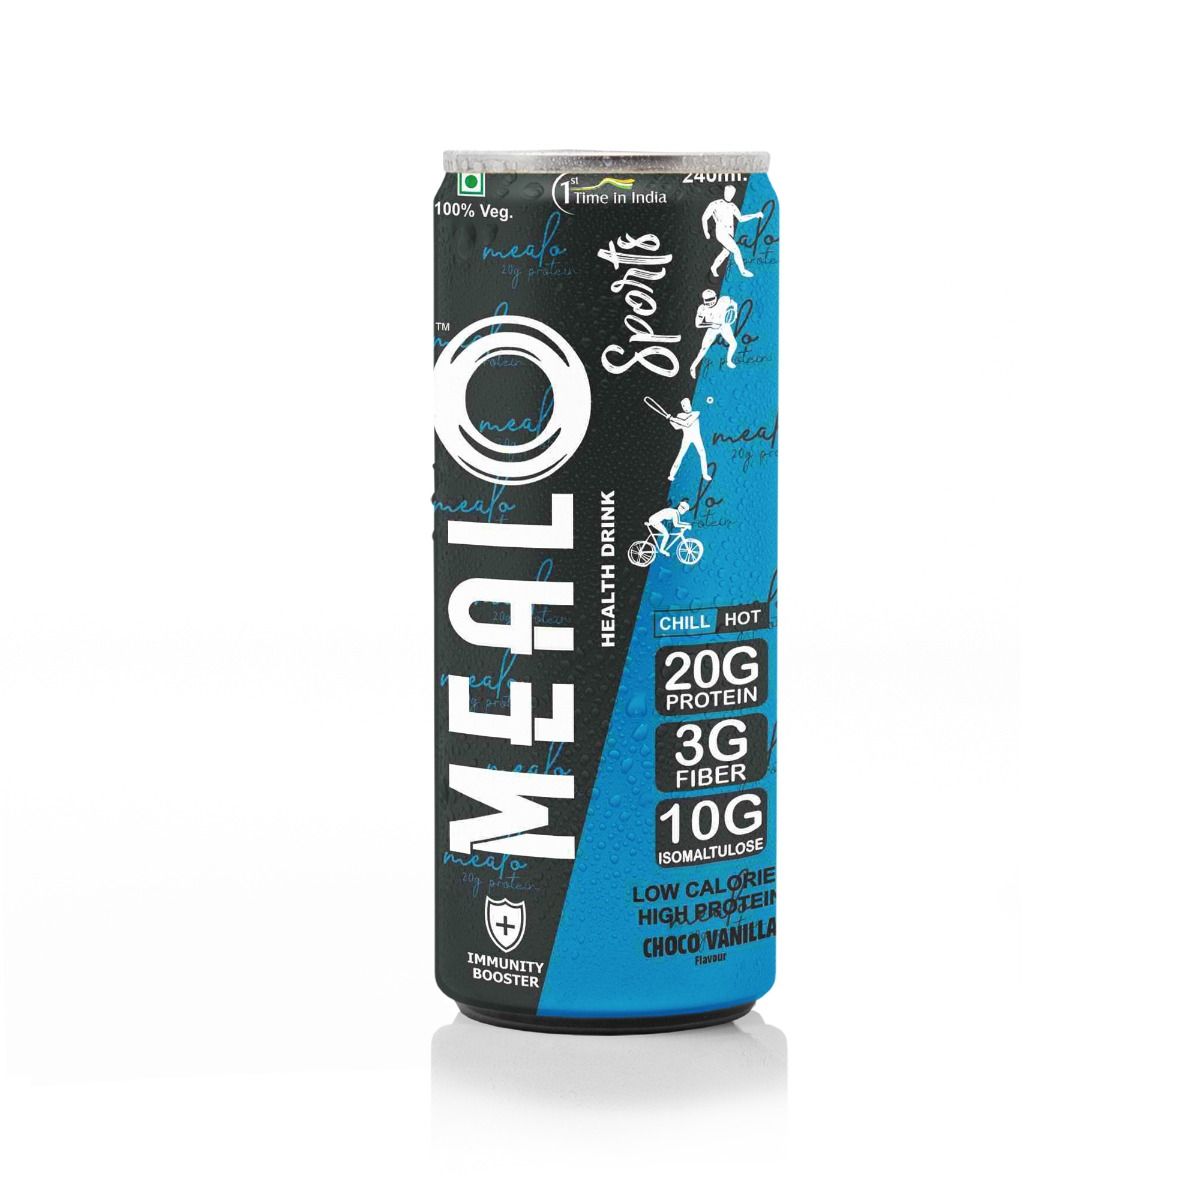 Mealo Choco Vanilla Flavour Health Drink, 240 ml, Pack of 1 